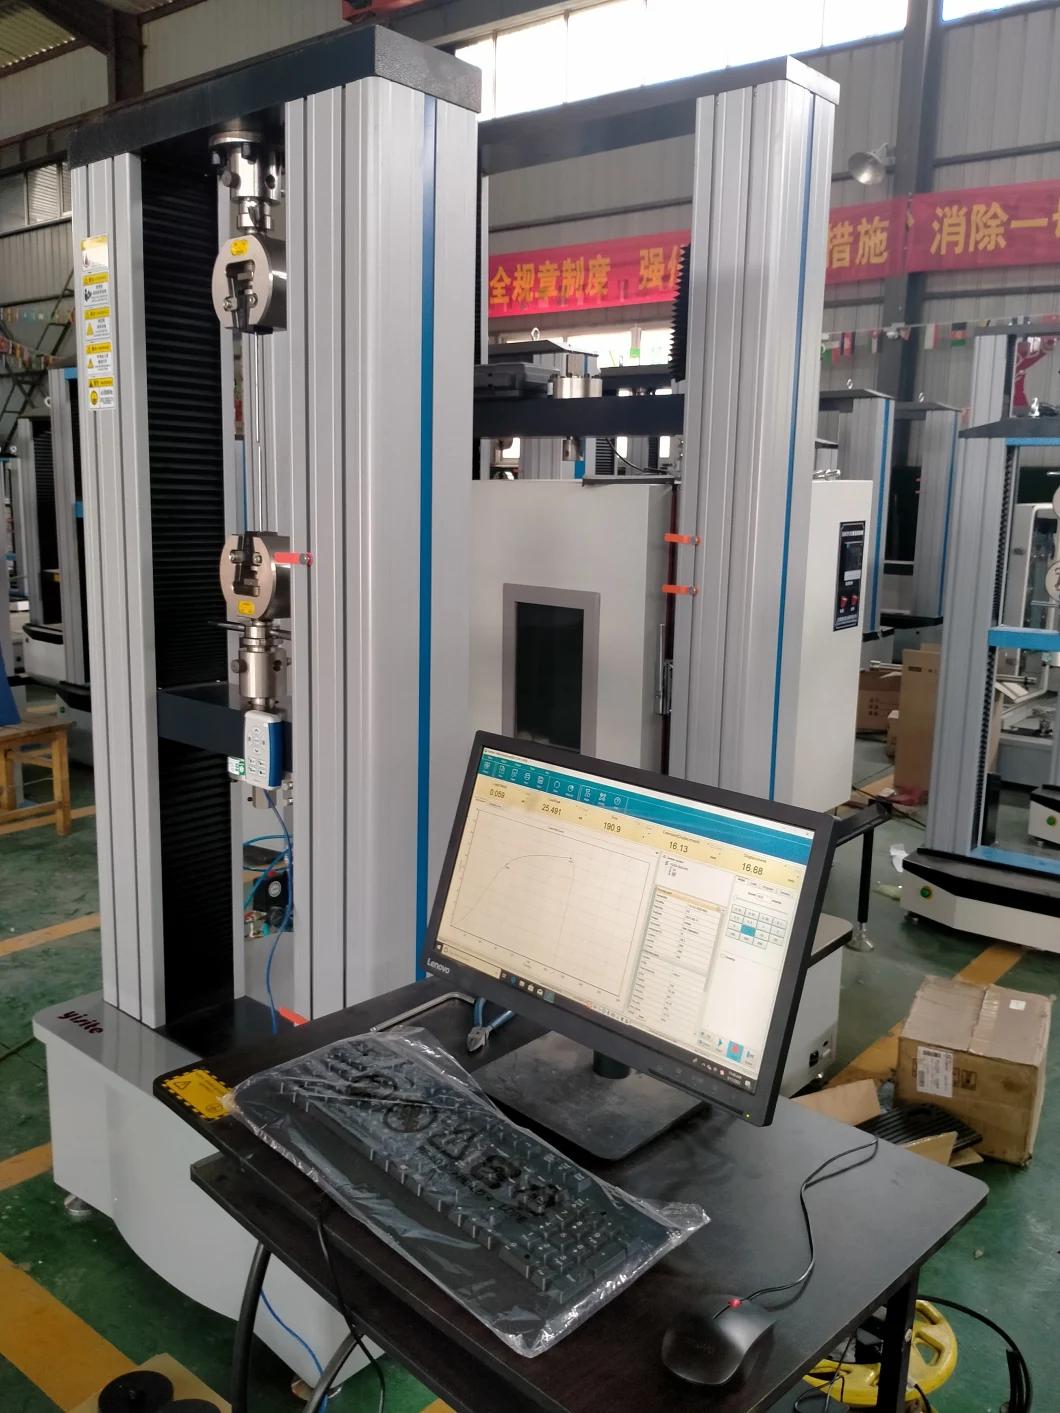 10kn 20kn 1ton 2ton Digital Spring Testing Equipment Spring Tensile and Compressive Tester Spring Tension and Compression Testing Machine